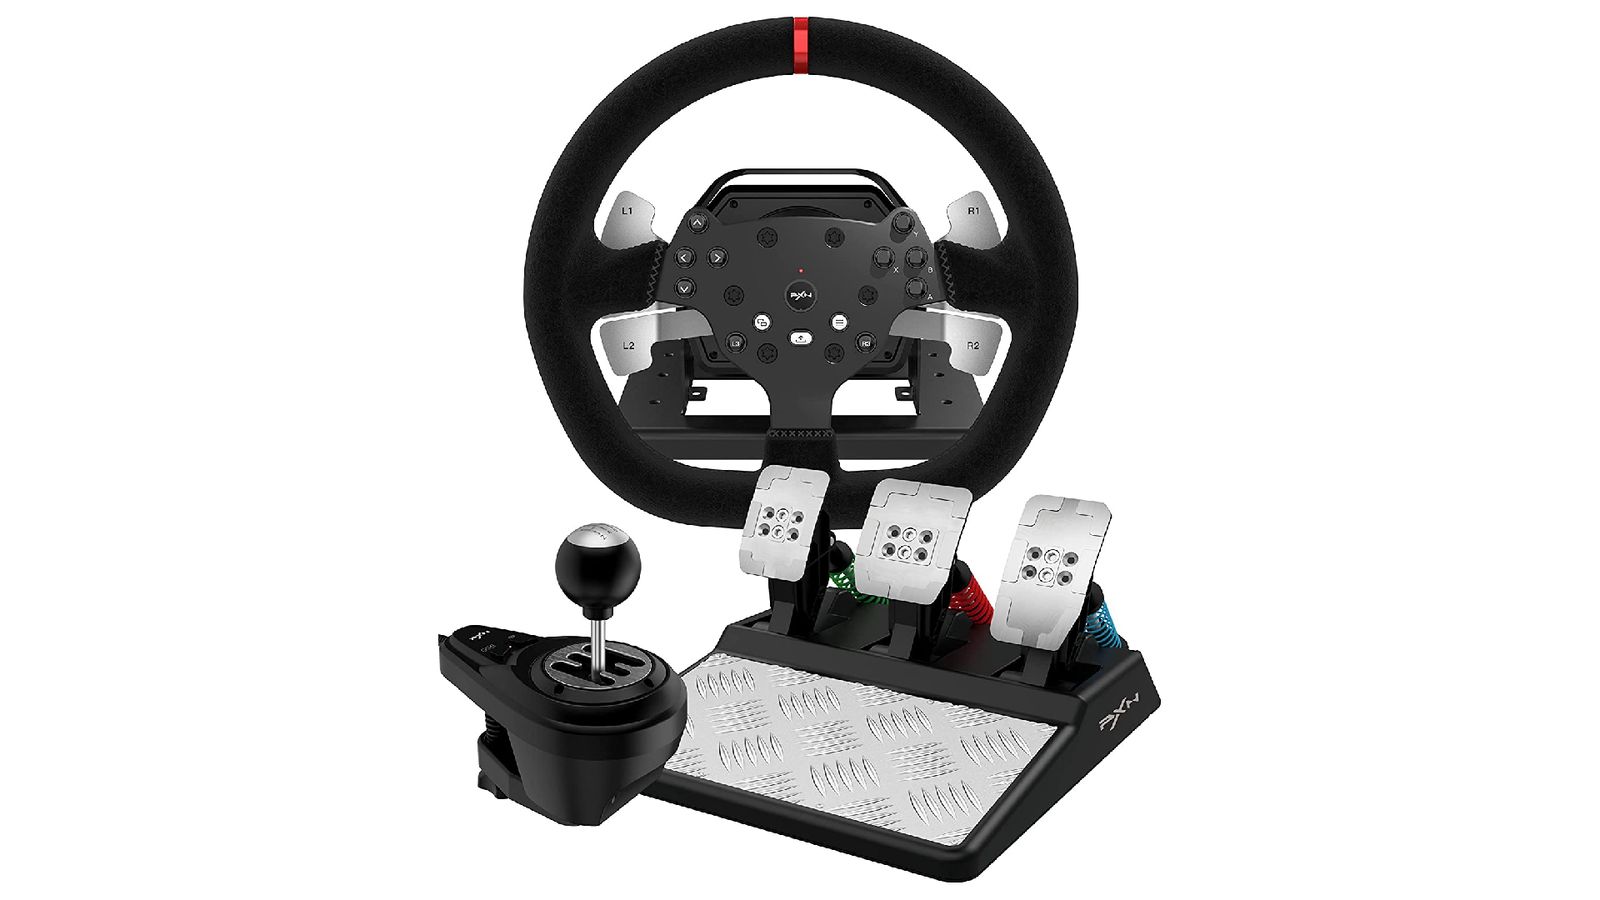 PXN V10 product image of a black wheel with a red central line next to pedals and a shifter.